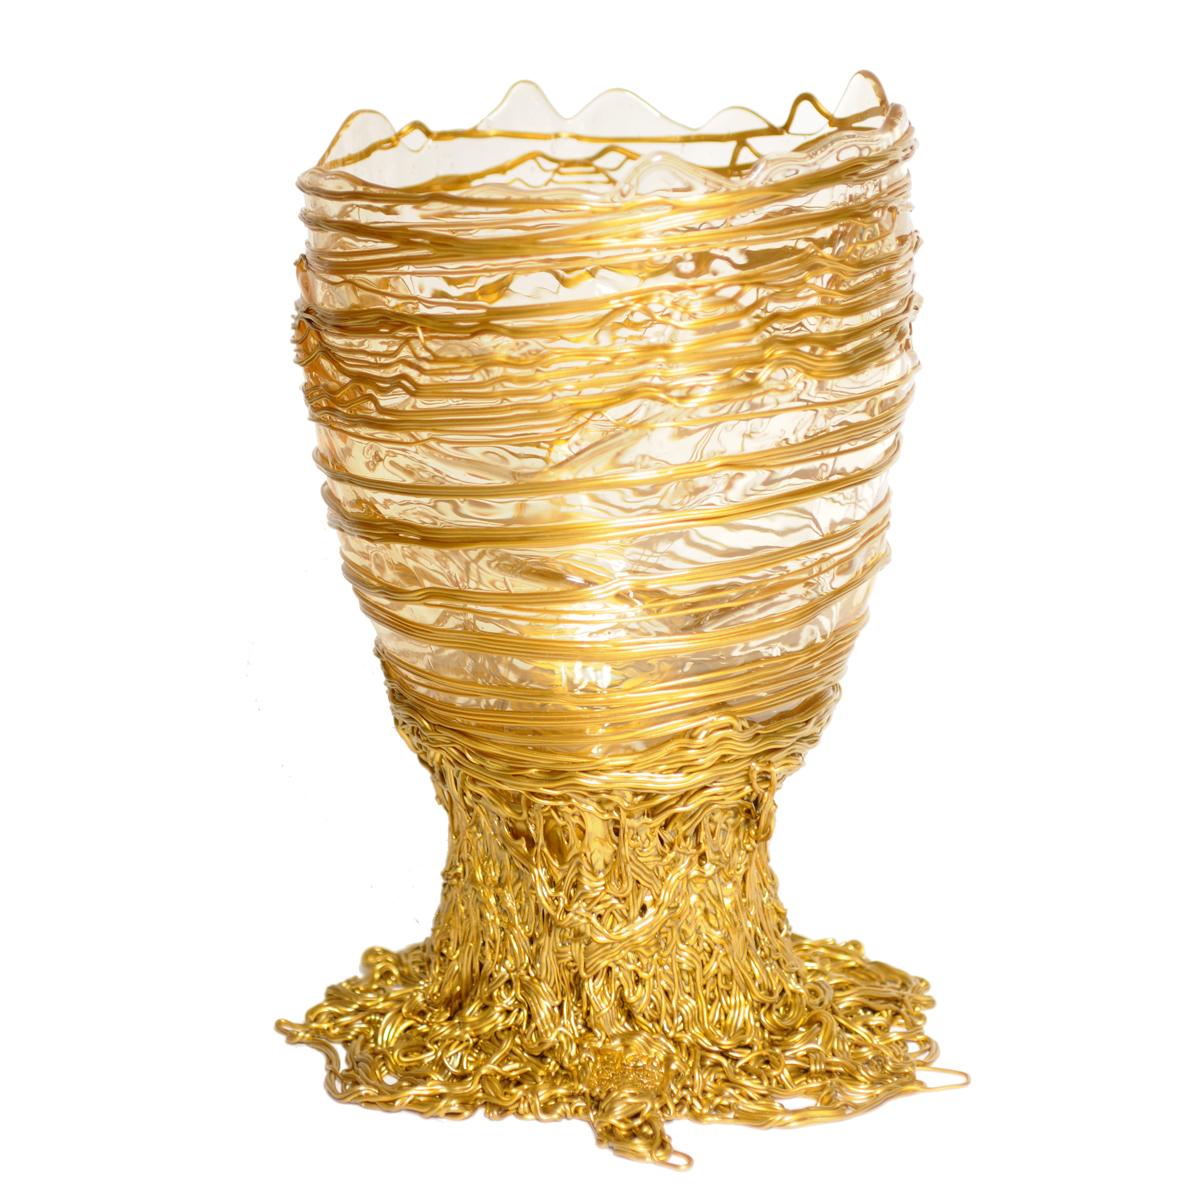 Spaghetti vase, clear and gold.

Vase in soft resin designed by Gaetano Pesce in 1995 for Fish Design collection.
Picture showing L size.
When ordering alternative sizes the proportions of the item will change.

Measures: L - ø 22cm x H